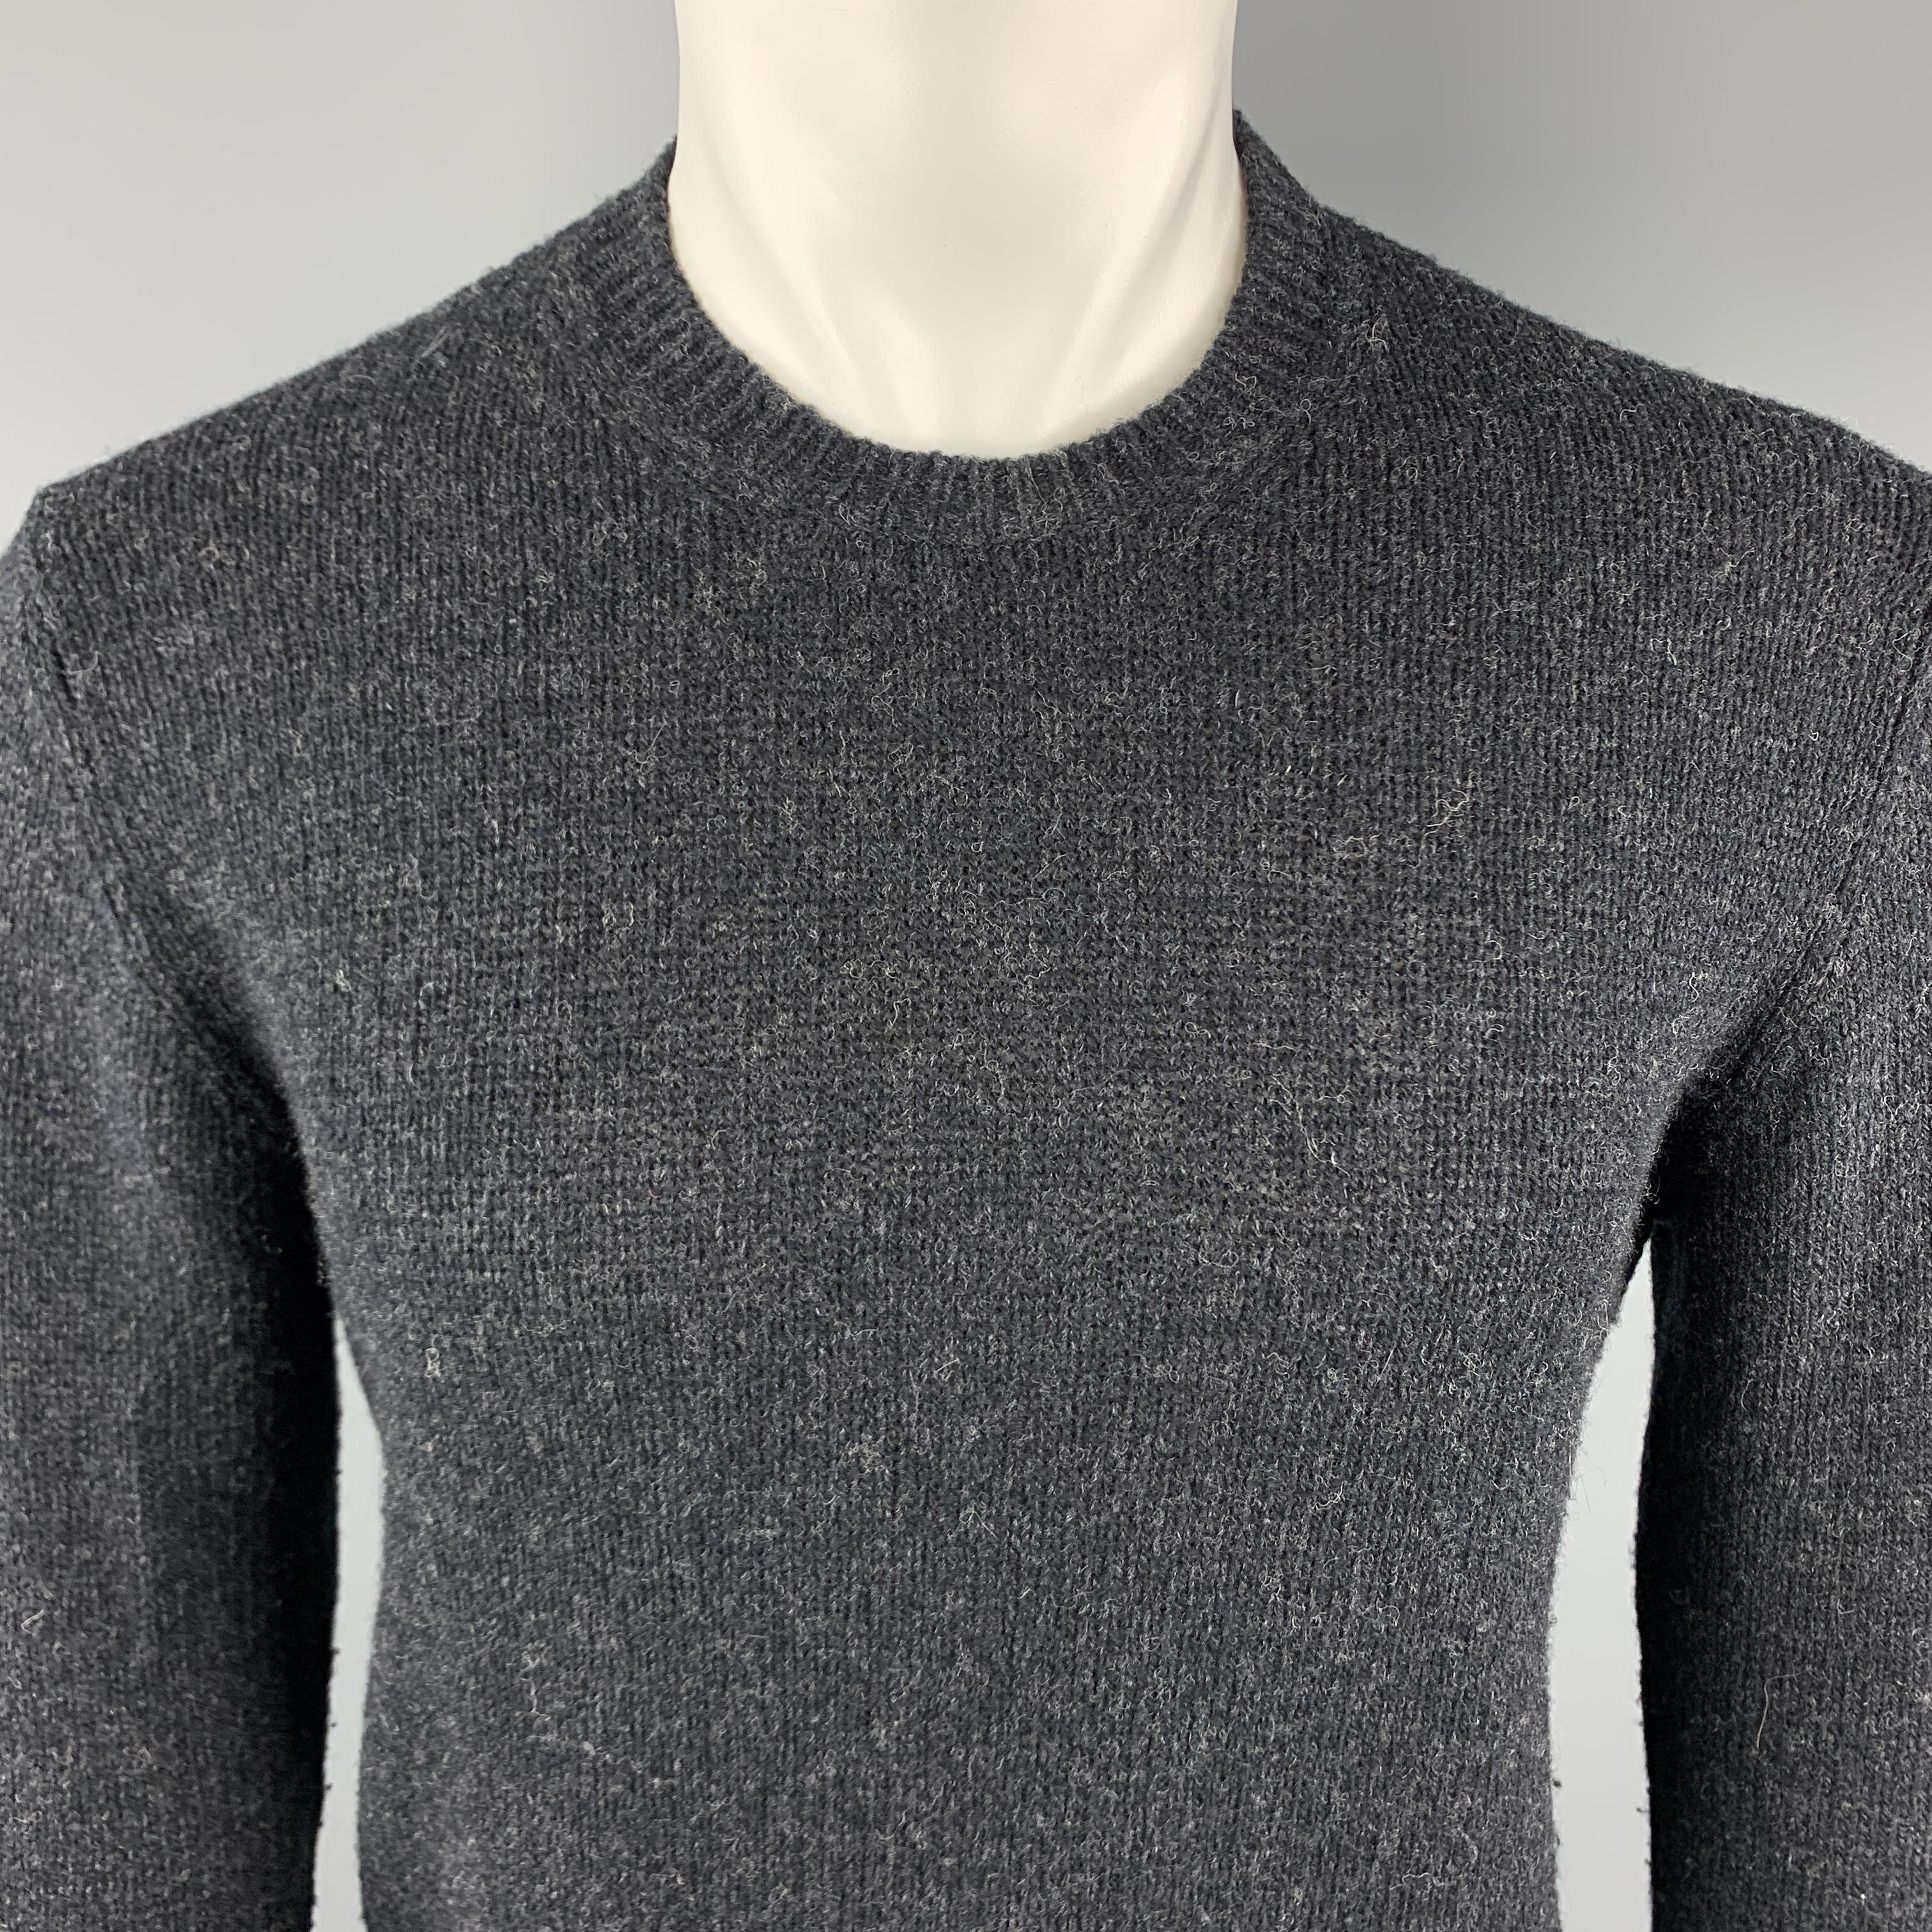 PRADA Pullover Sweater comes in a charcoal knitted wool blend material, featuring a crew-neck, suede elbow patches, and ribbed cuffs and hem. Made in Italy. 

Excellent Pre-Owned Condition.
Marked: IT 48

Measurements:

Shoulder: 17 in.
Chest: 39